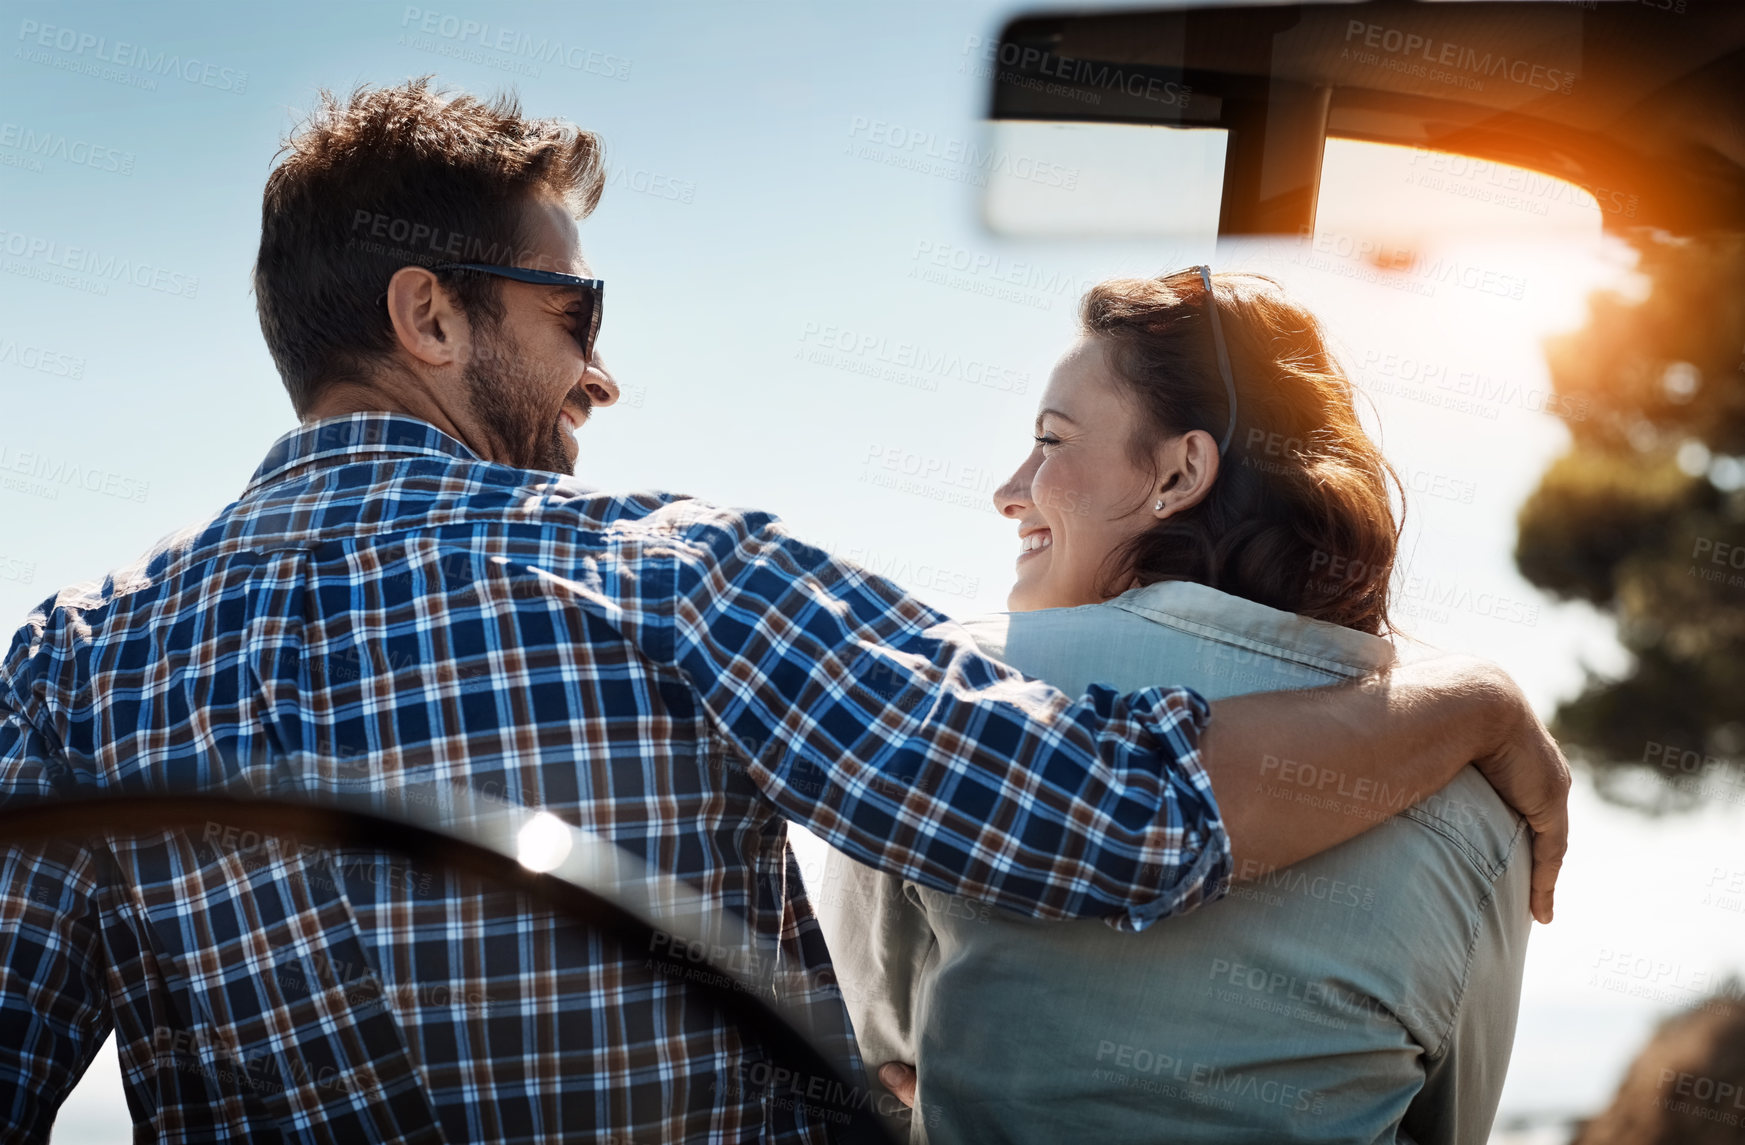 Buy stock photo Rearview shot of an affectionate couple taking in the sights while enjoying a road trip